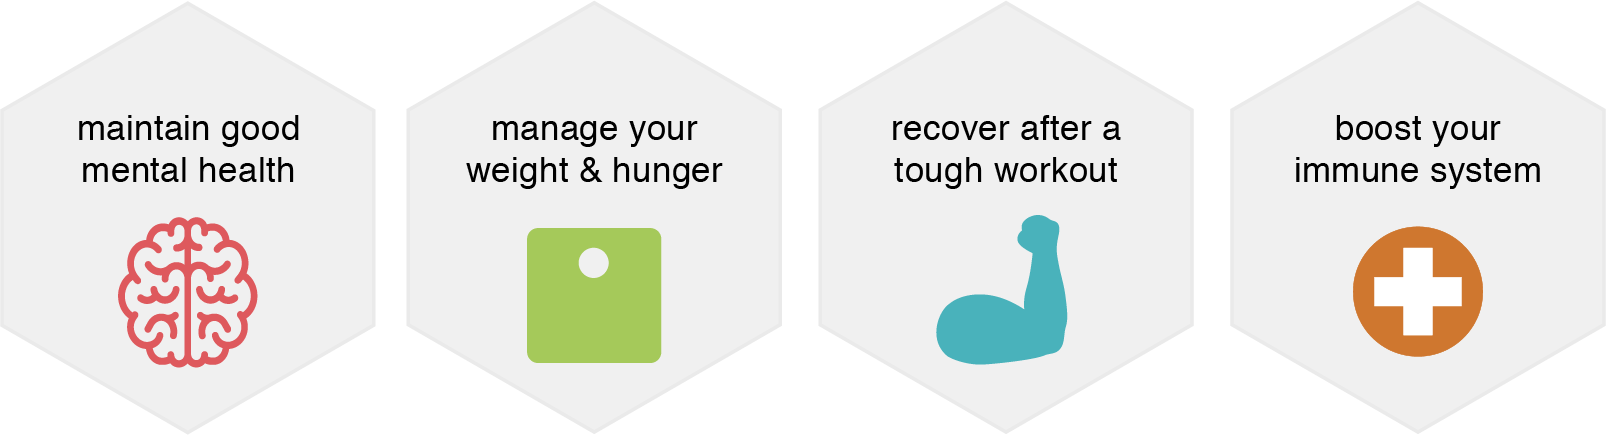 Set of four hexagons with the text: Maintain good mental health, manage your weight and hunger, recover after a tough workout, and boost your immune system